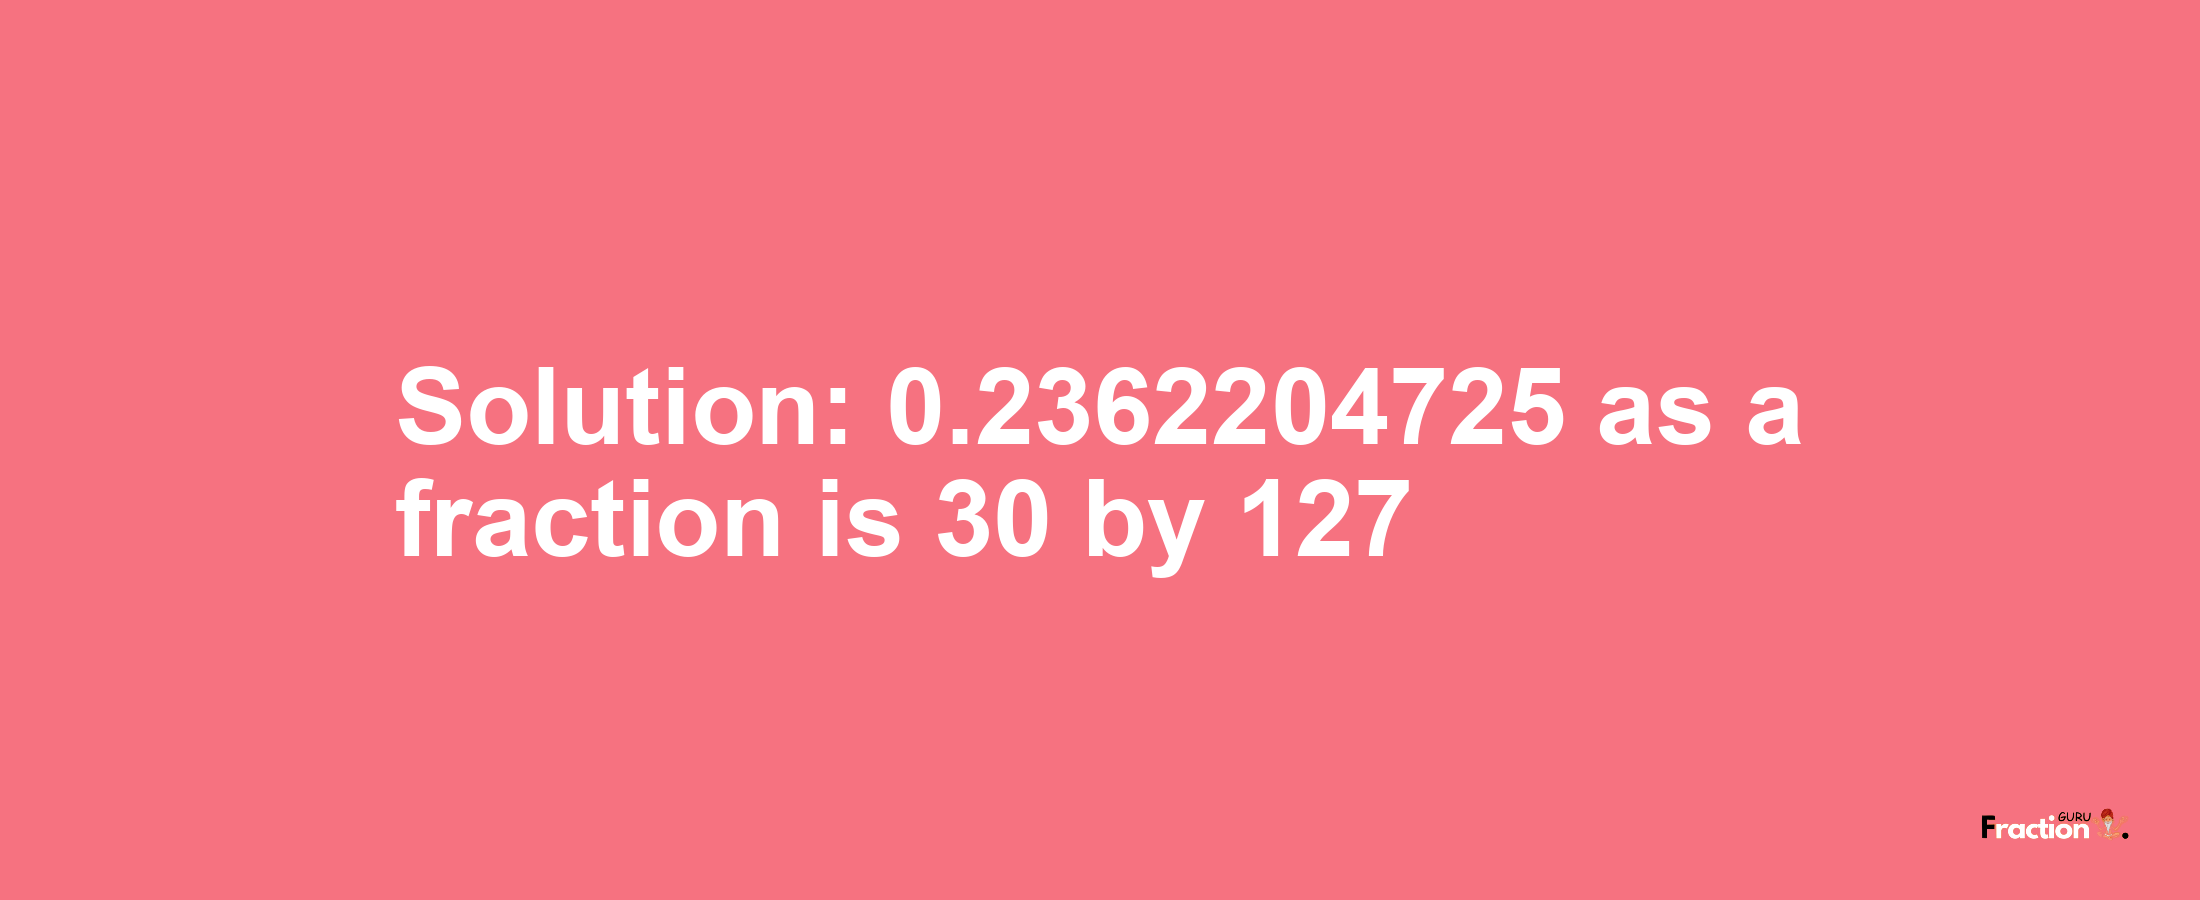 Solution:0.2362204725 as a fraction is 30/127